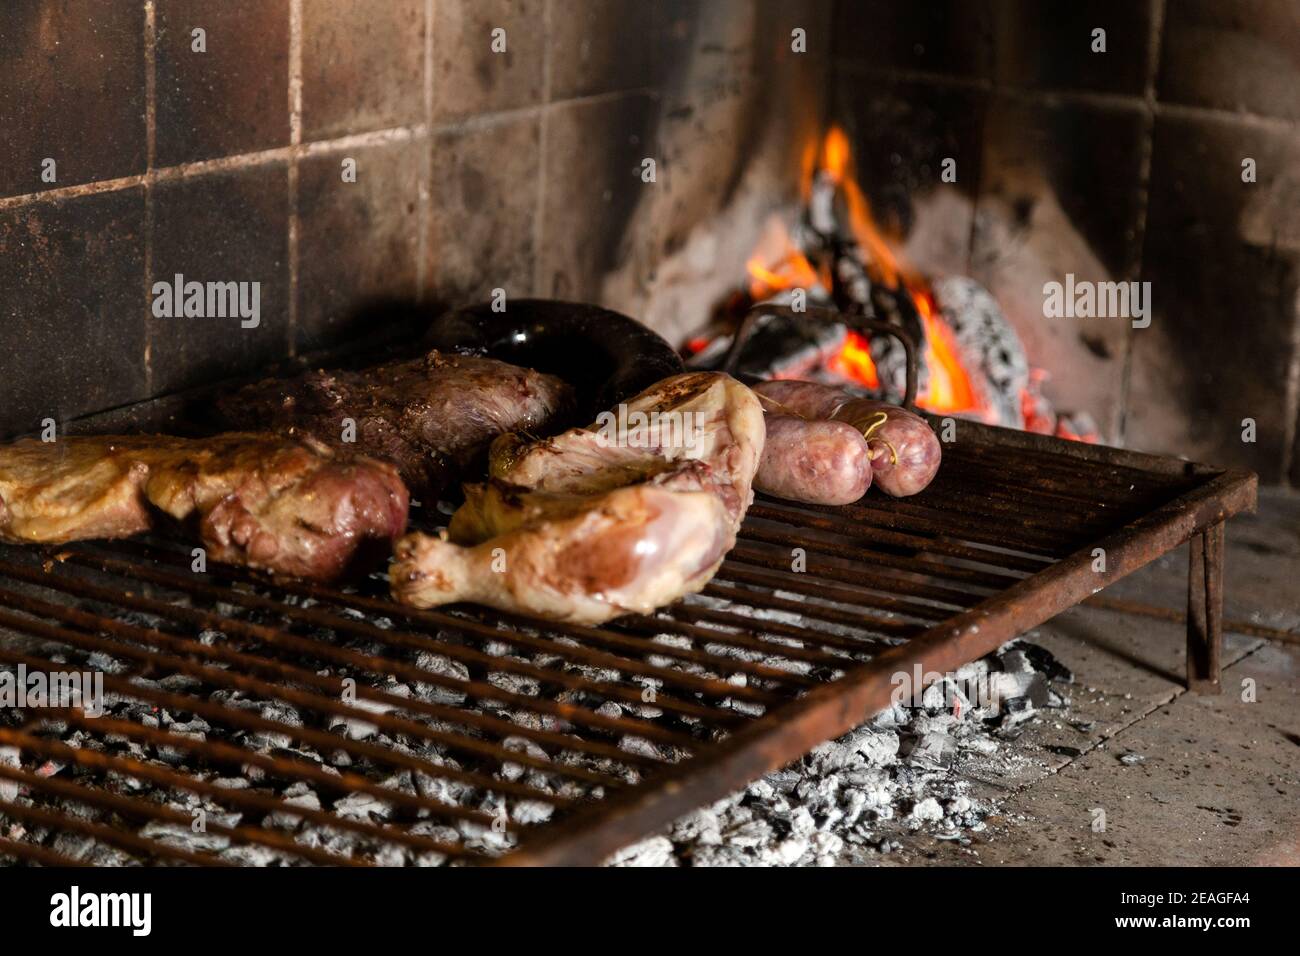 Barbecue. Meat cuts of cow, chicken and pork warming on the embers on an iron grill. Traditional Argentinian bbq. Argentina meal. Stock Photo